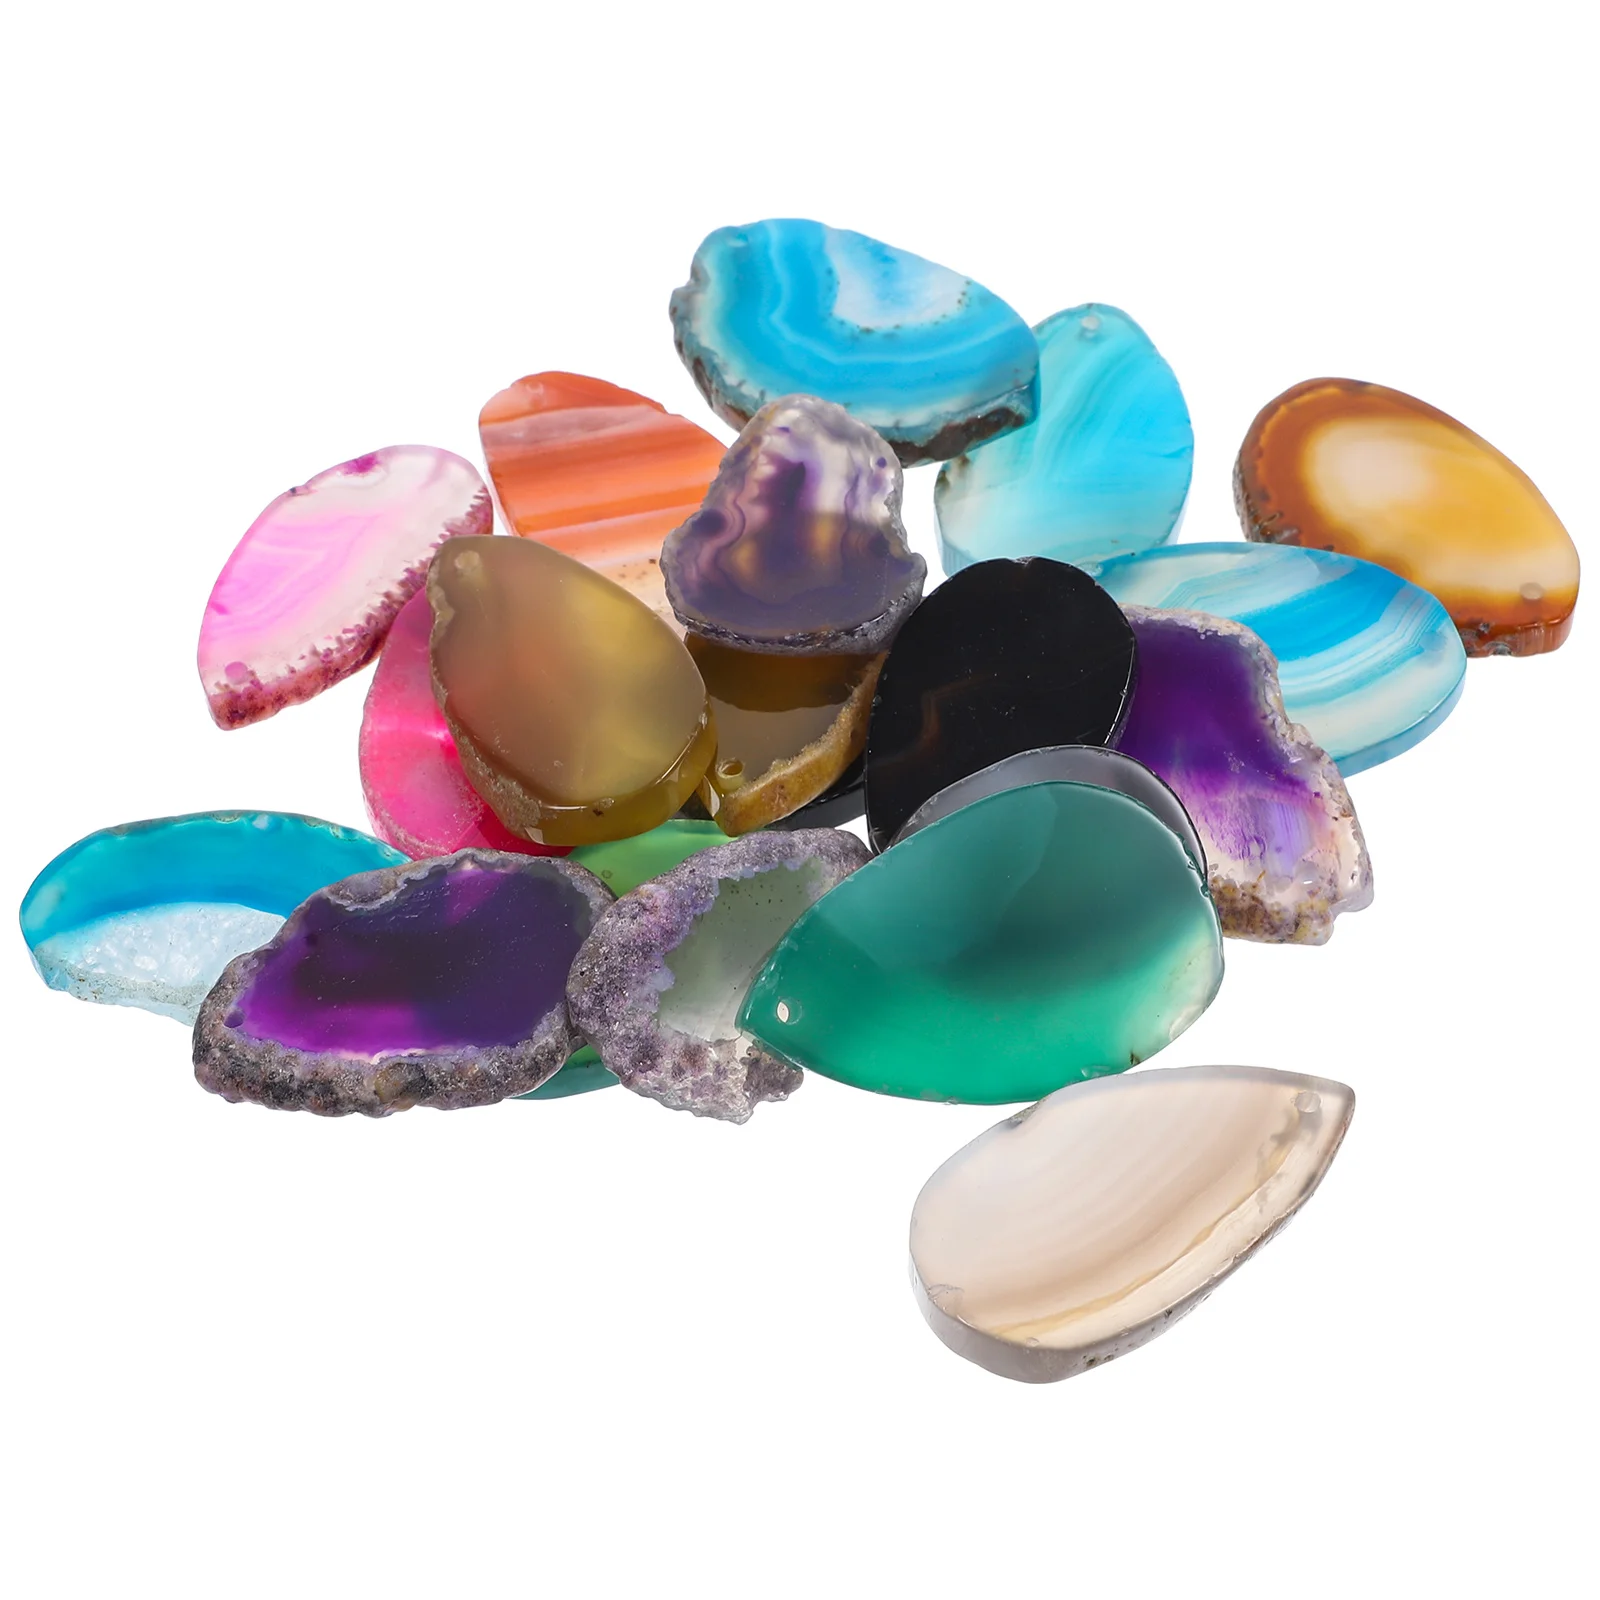 

20 Pcs Agate Slices Handicrafts Supplies Colorful Decor DIY Necklace Pendants Wind Bell Ornament Earring Charms Valentine